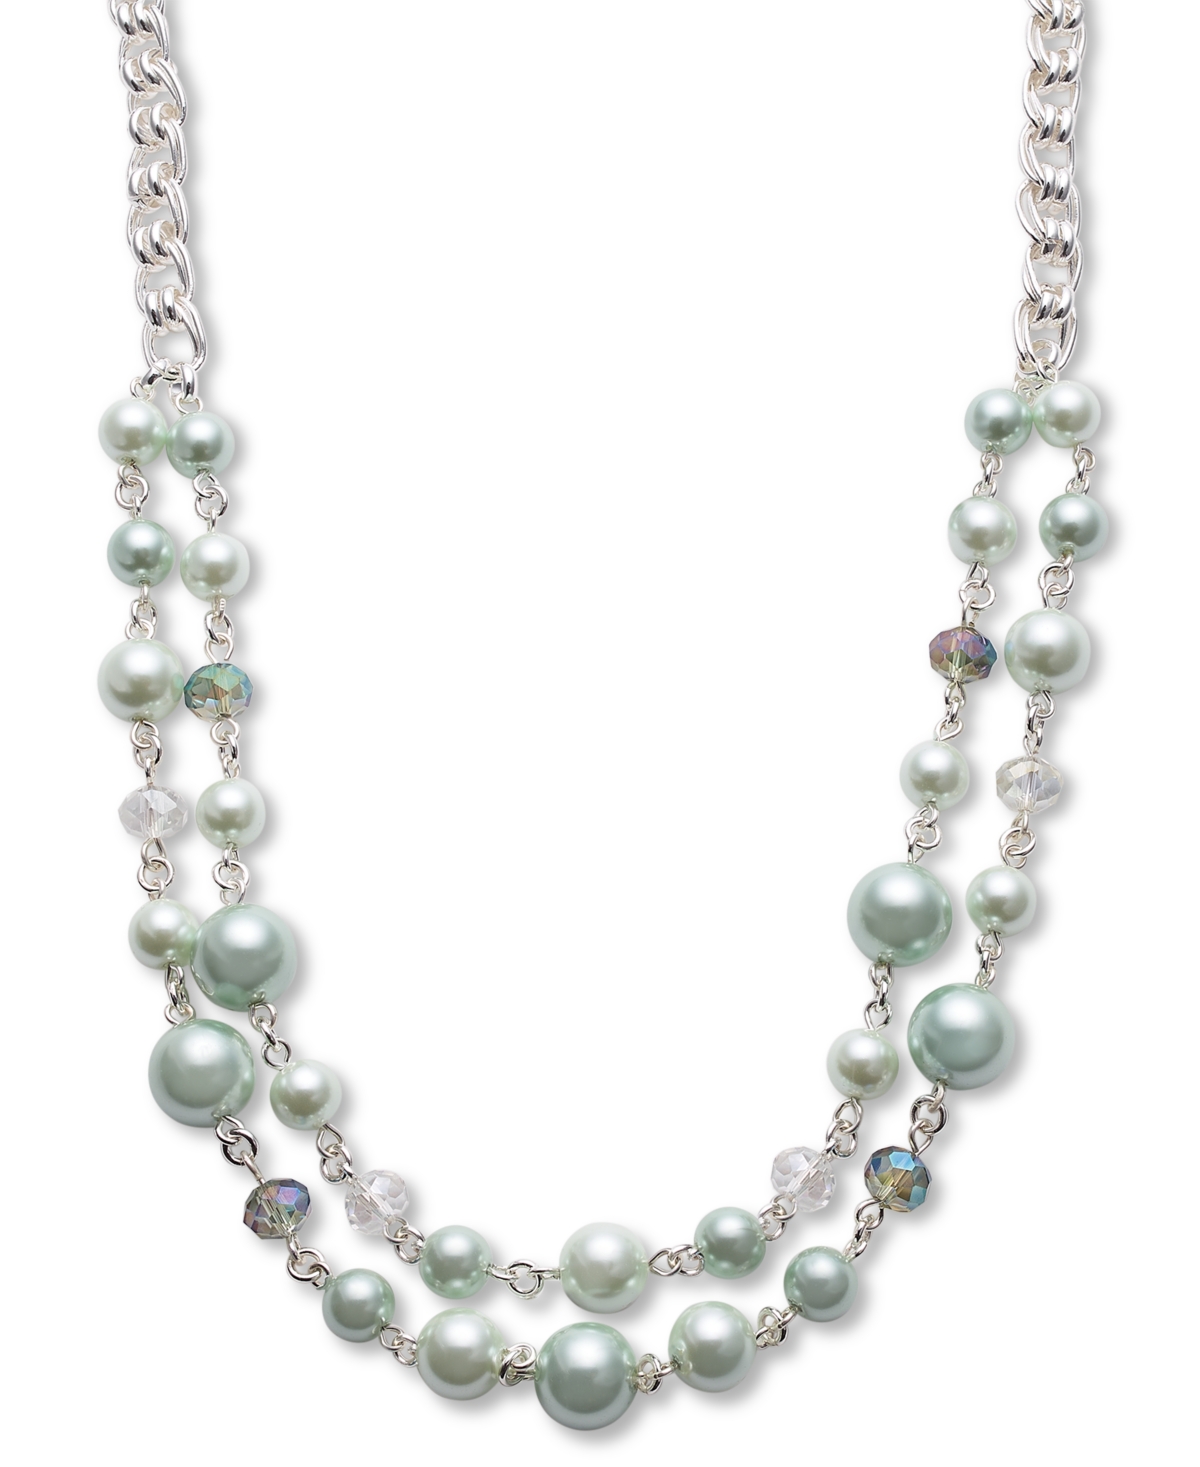 Silver-Tone Beaded Layered Necklace, 18" + 2" extender, Created for Macy's - Green